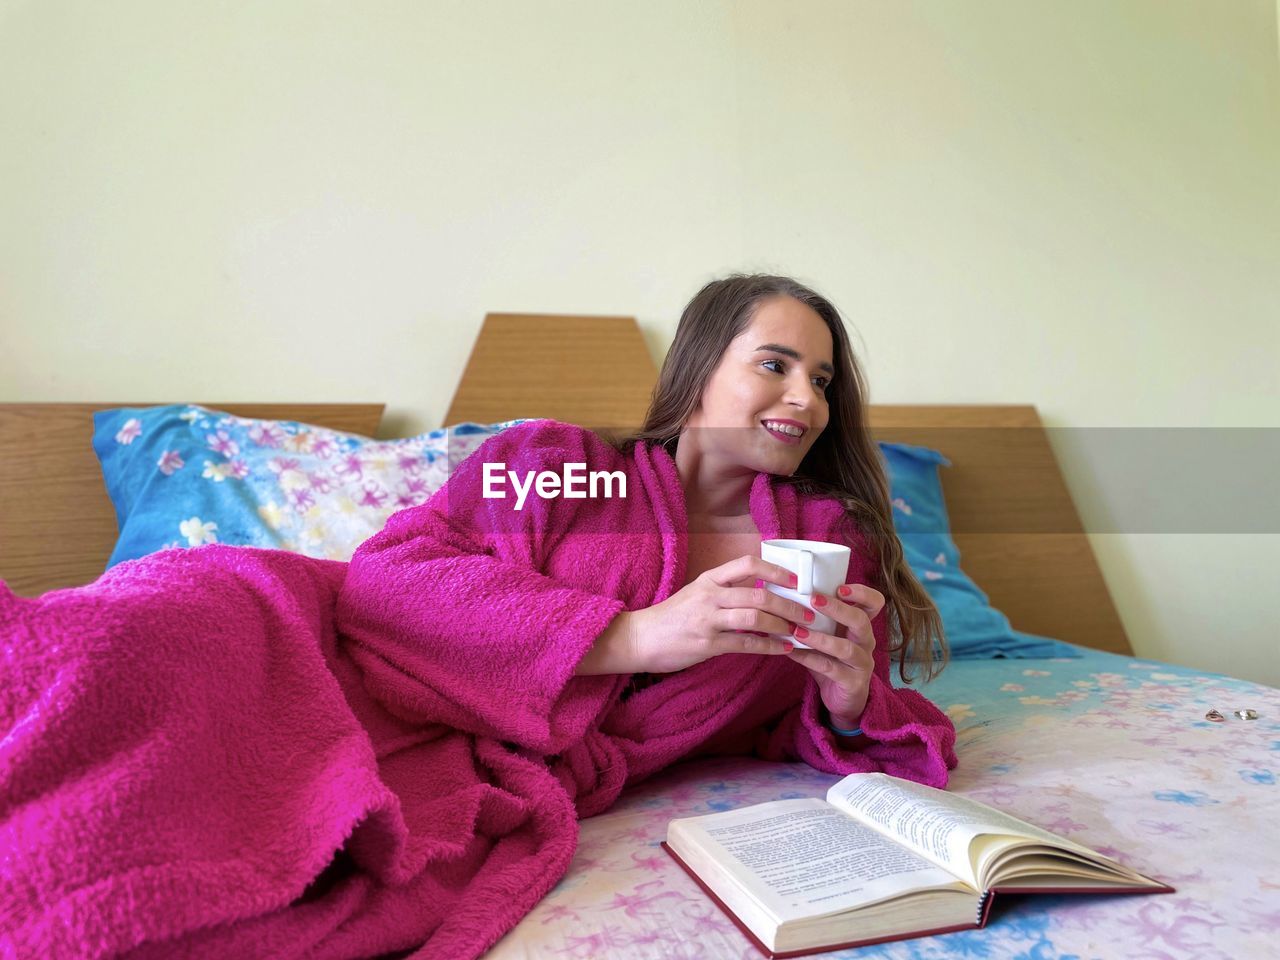 Woman wearing pink bathrobe lying down on the bed holding a cup of coffee in her hands